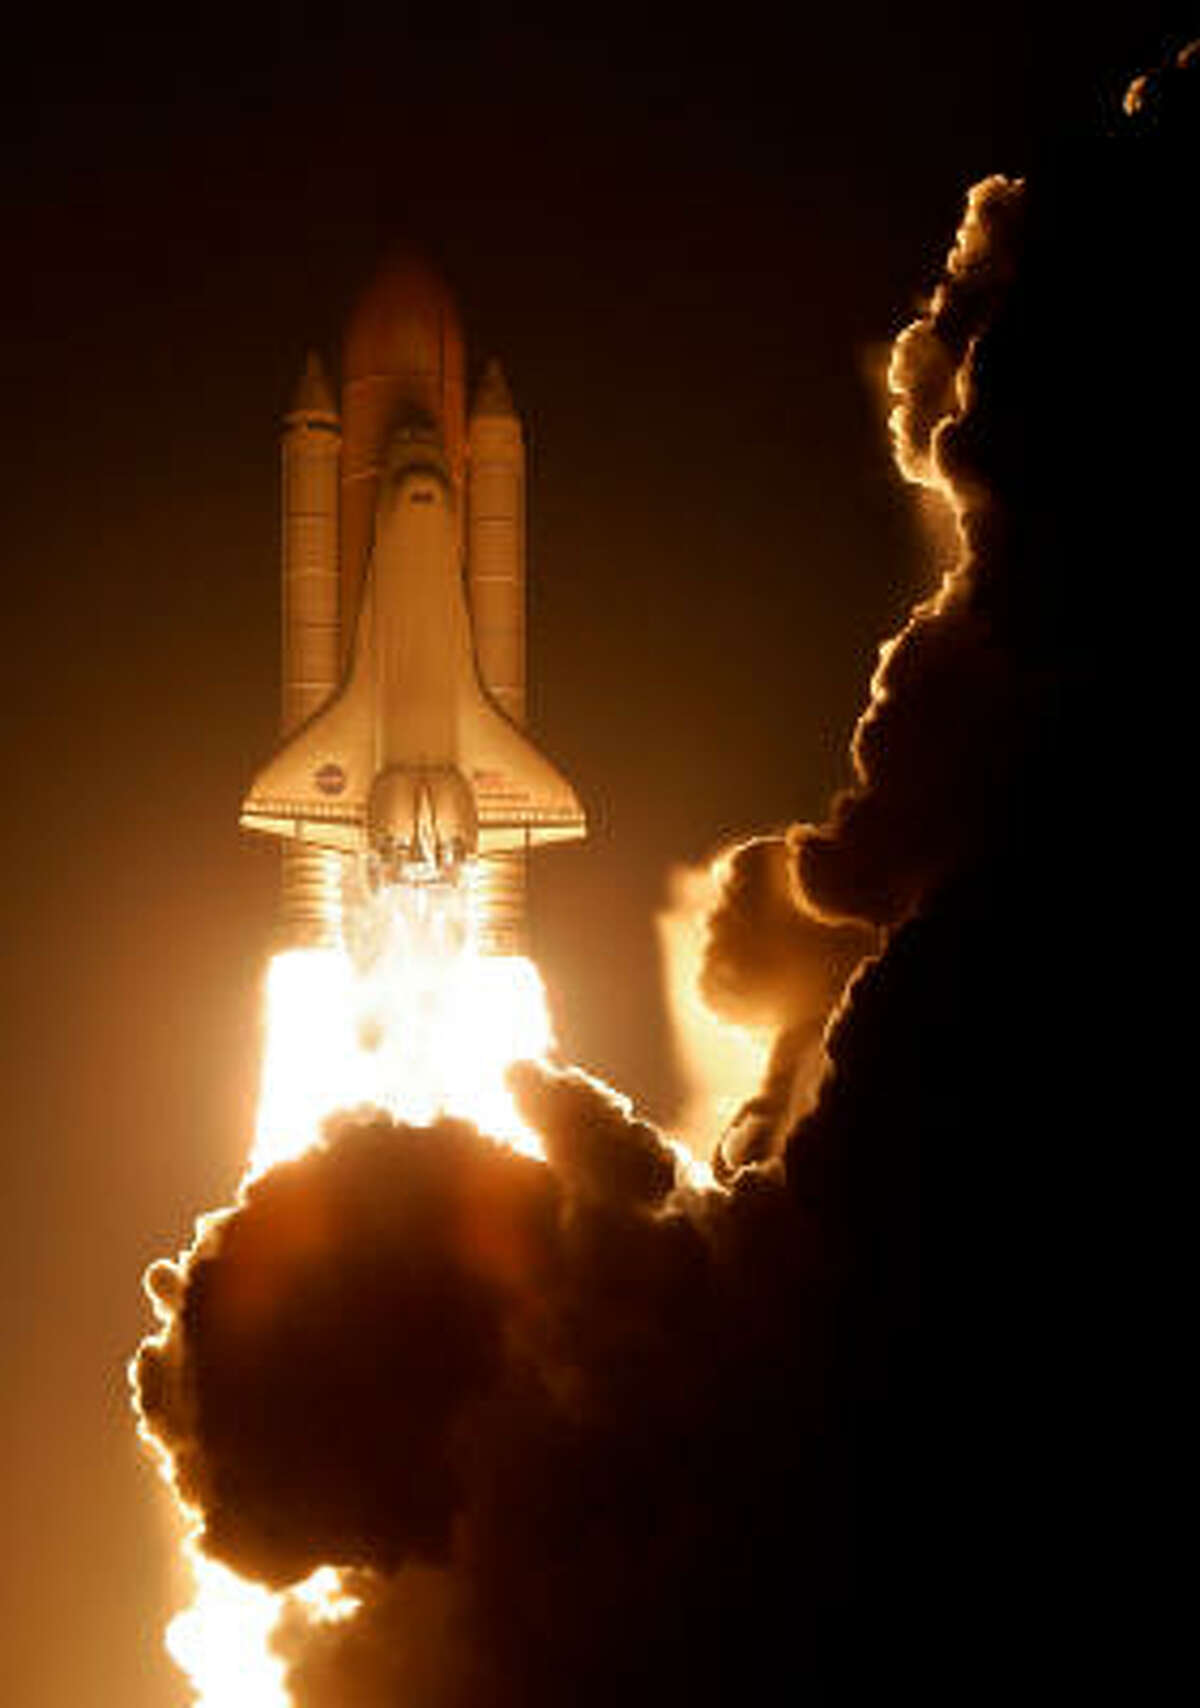 Space Shuttle Endeavour blasts off at NASA's Kennedy Space Center on Monday in Cape Canaveral, Fla.